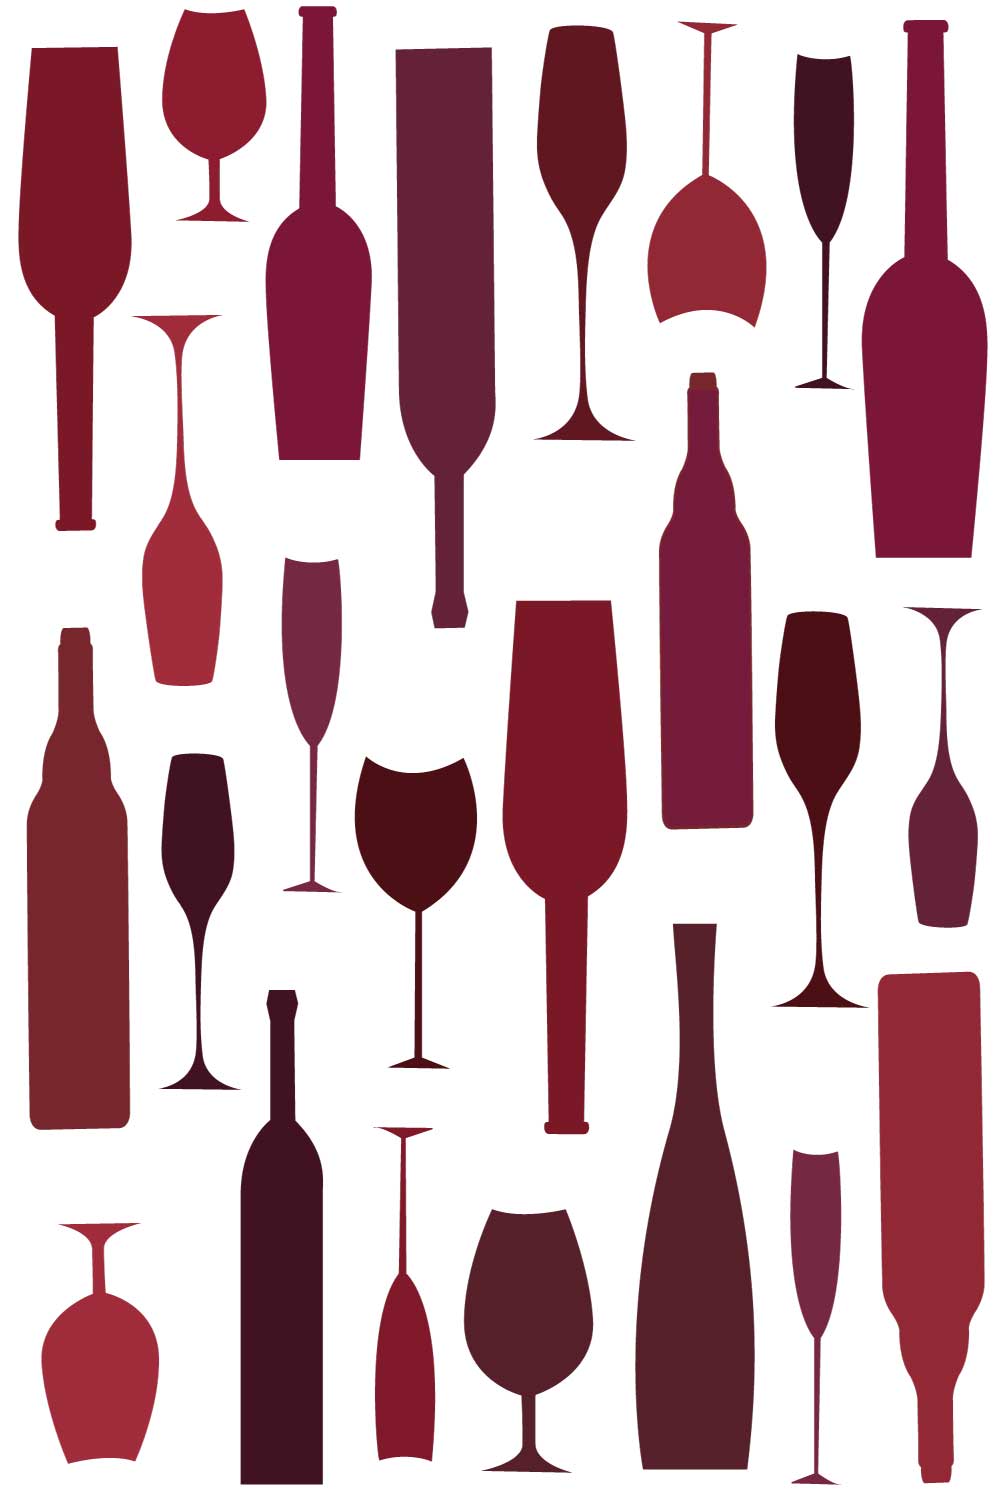 wine glasses and bottles pinterest preview image.